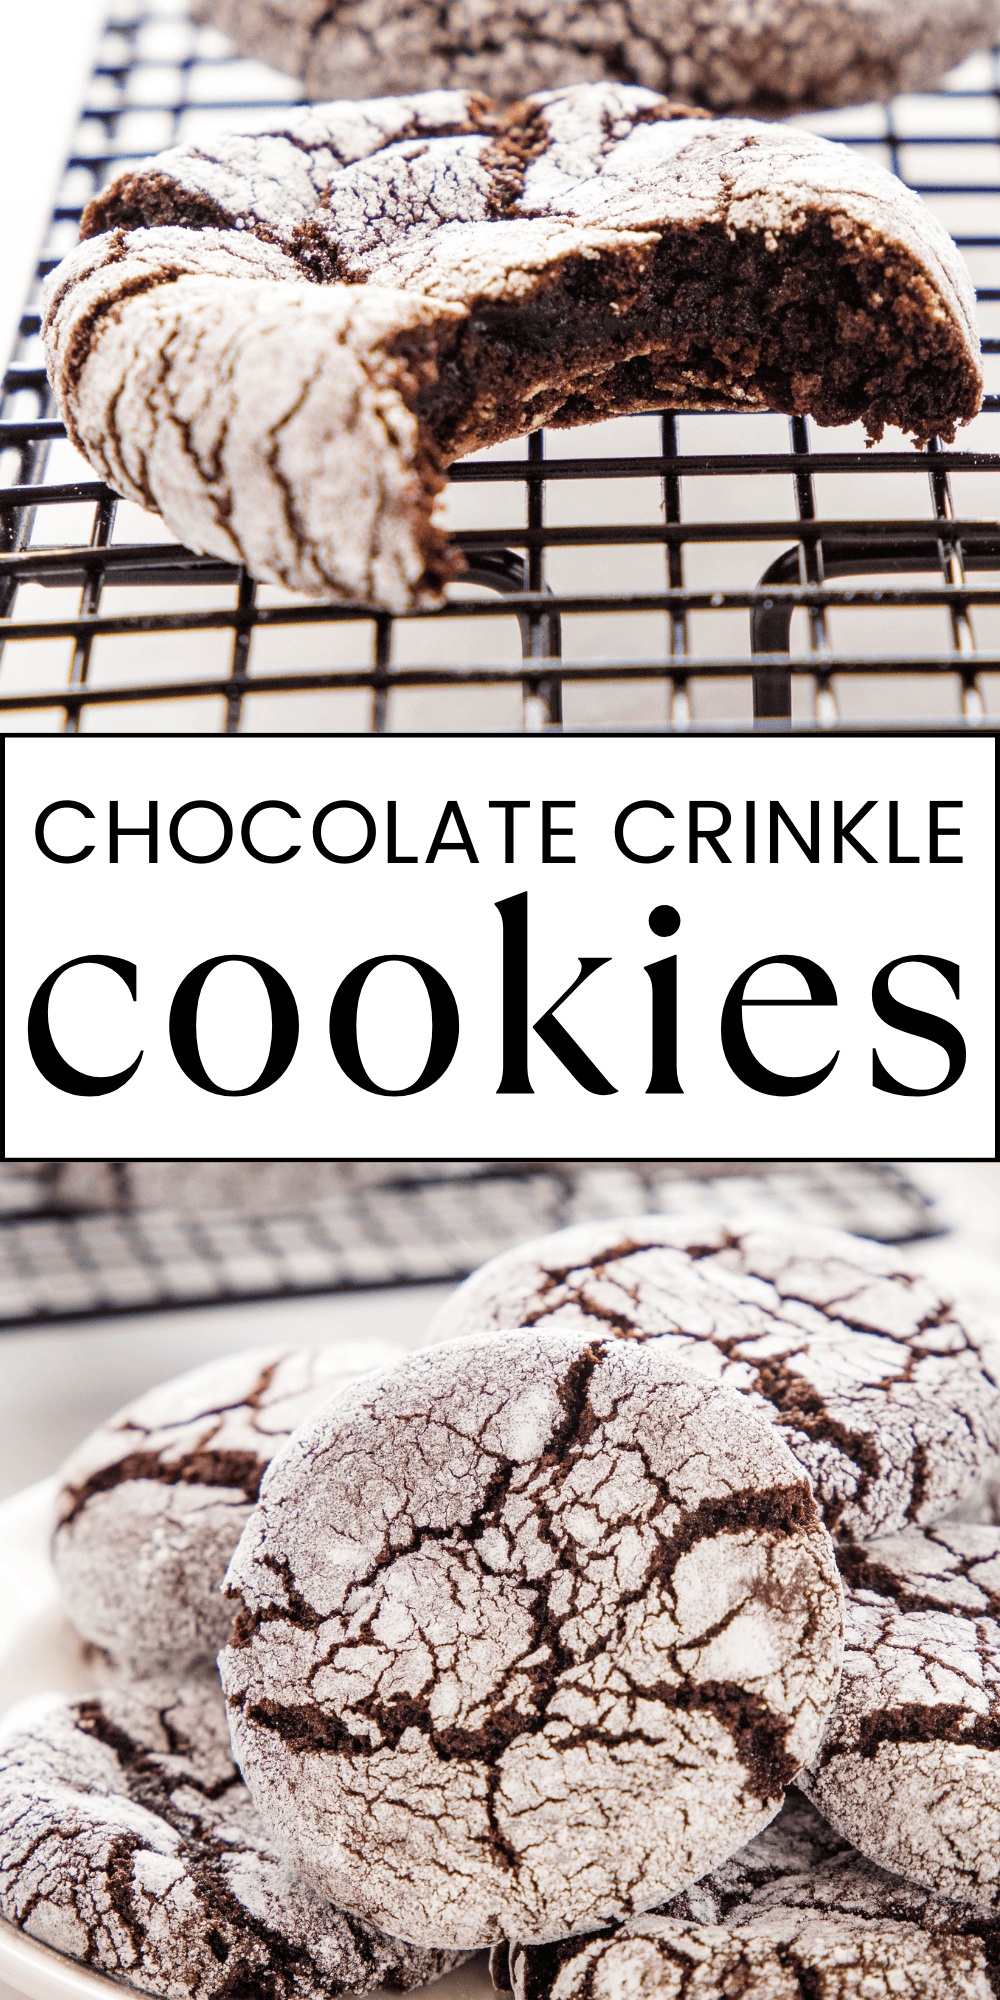 This Chocolate Crinkle Cookies recipe is an easy-to-make chocolate Christmas cookie recipe that's perfect for the holidays! They're crispy on the outside and soft & fudgy on the inside. Recipe from thebusybaker.ca! #holiday #cookies #baking #christmasbaking #chocolate #chocolatecrinklecookies #cookietray #homemade #holidays via @busybakerblog